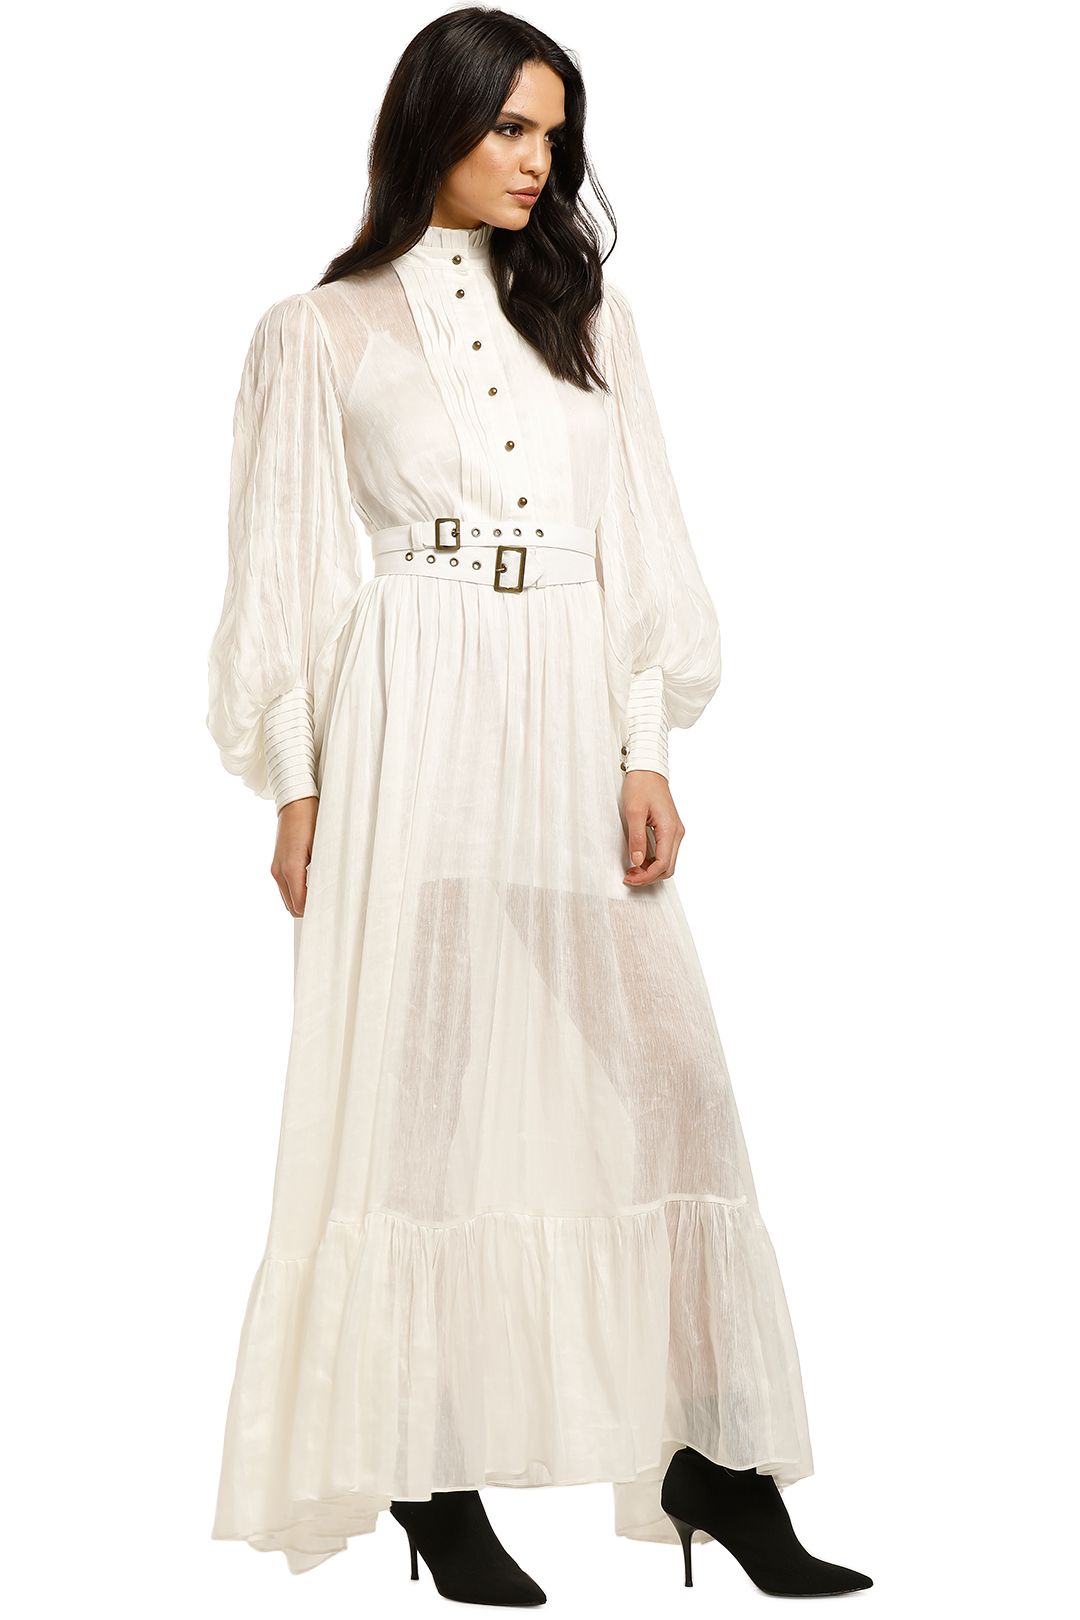 Leo-and-Lin-Serenity-Linen-Dress-White-Side